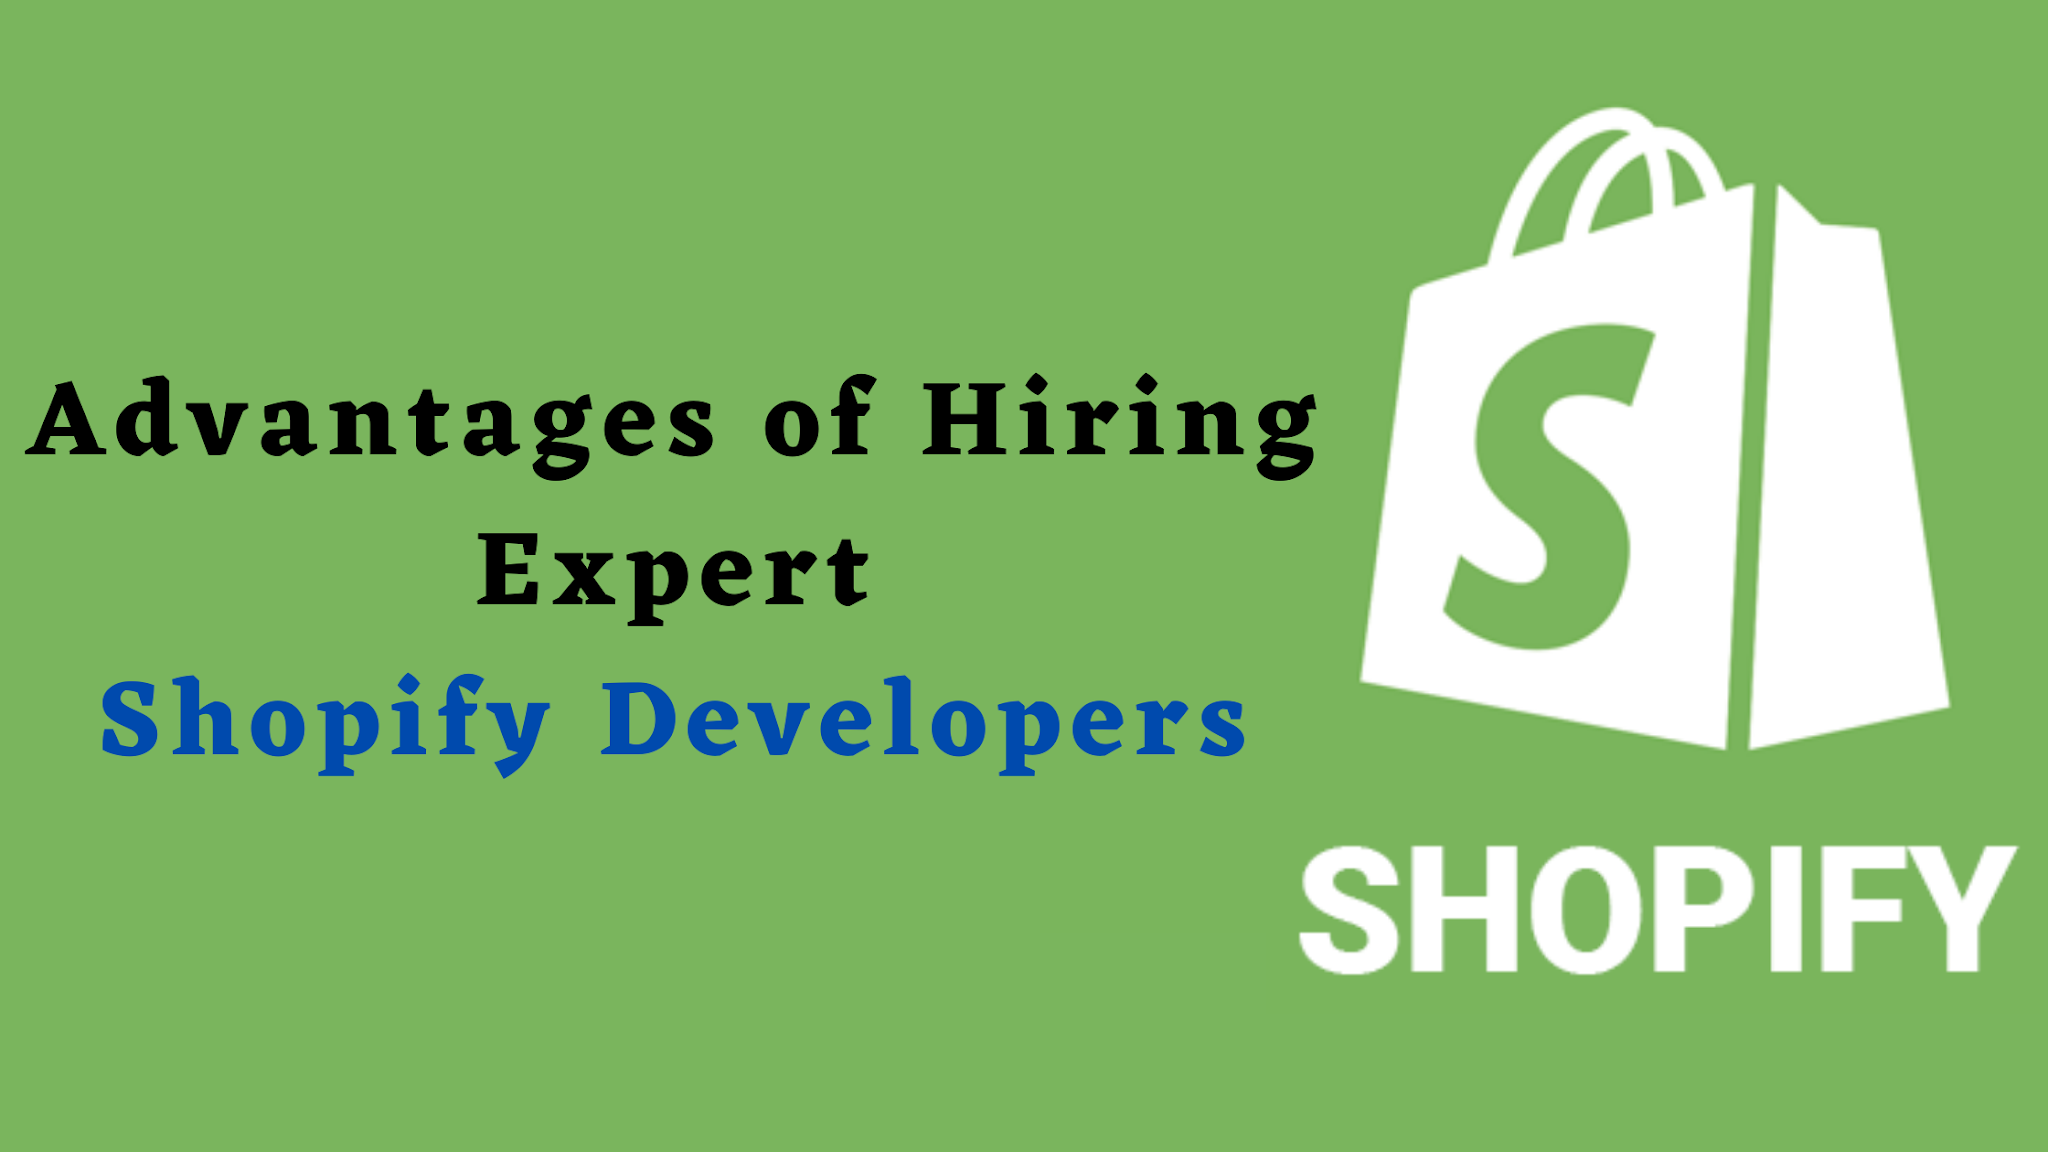 Advantages of Hiring Expert Shopify Developers